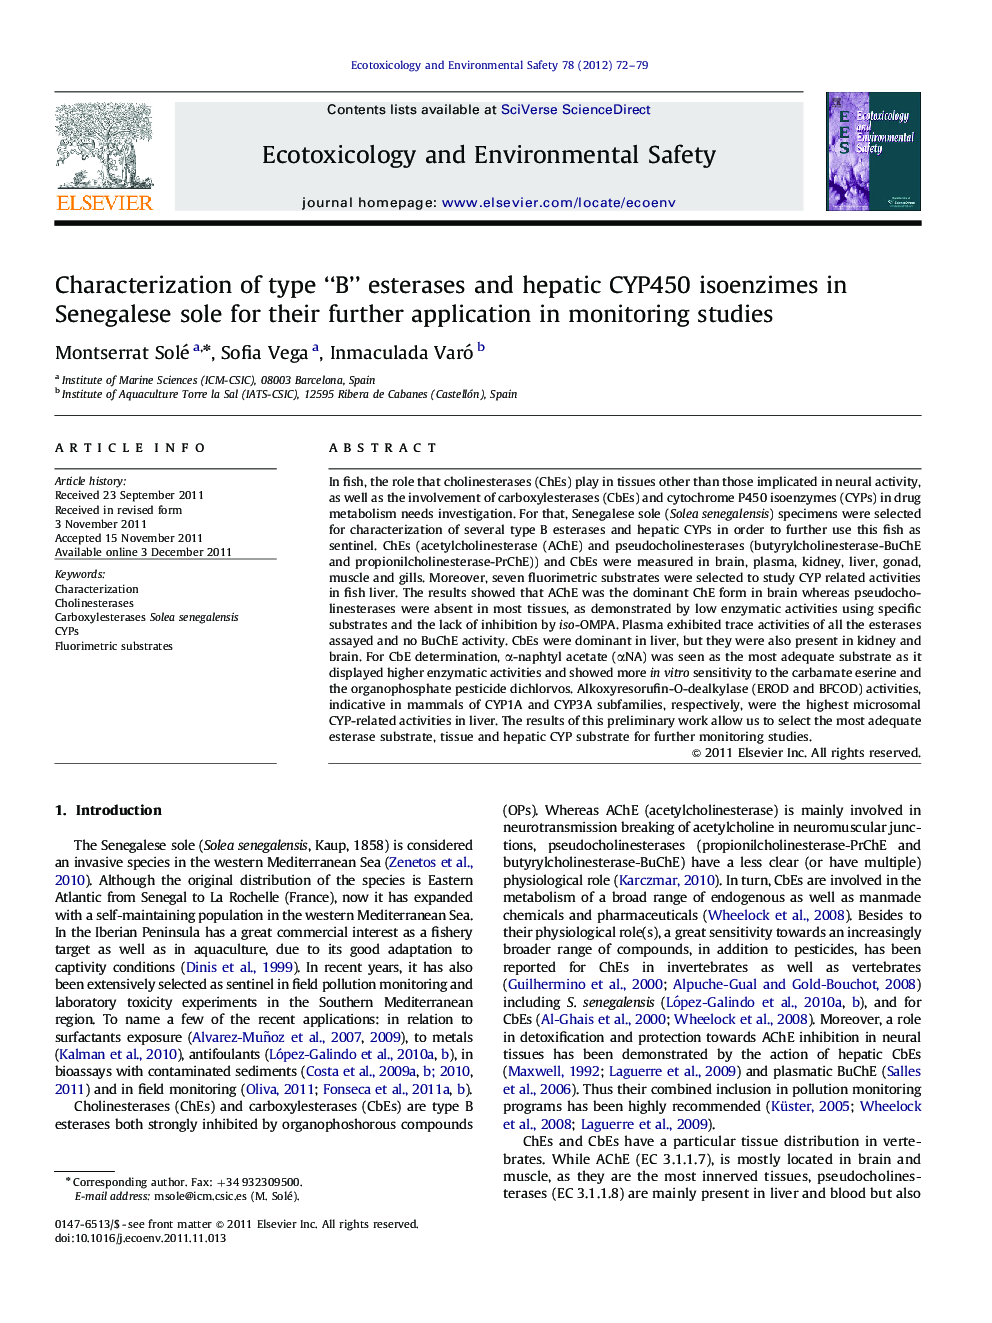 Characterization of type “B” esterases and hepatic CYP450 isoenzimes in Senegalese sole for their further application in monitoring studies